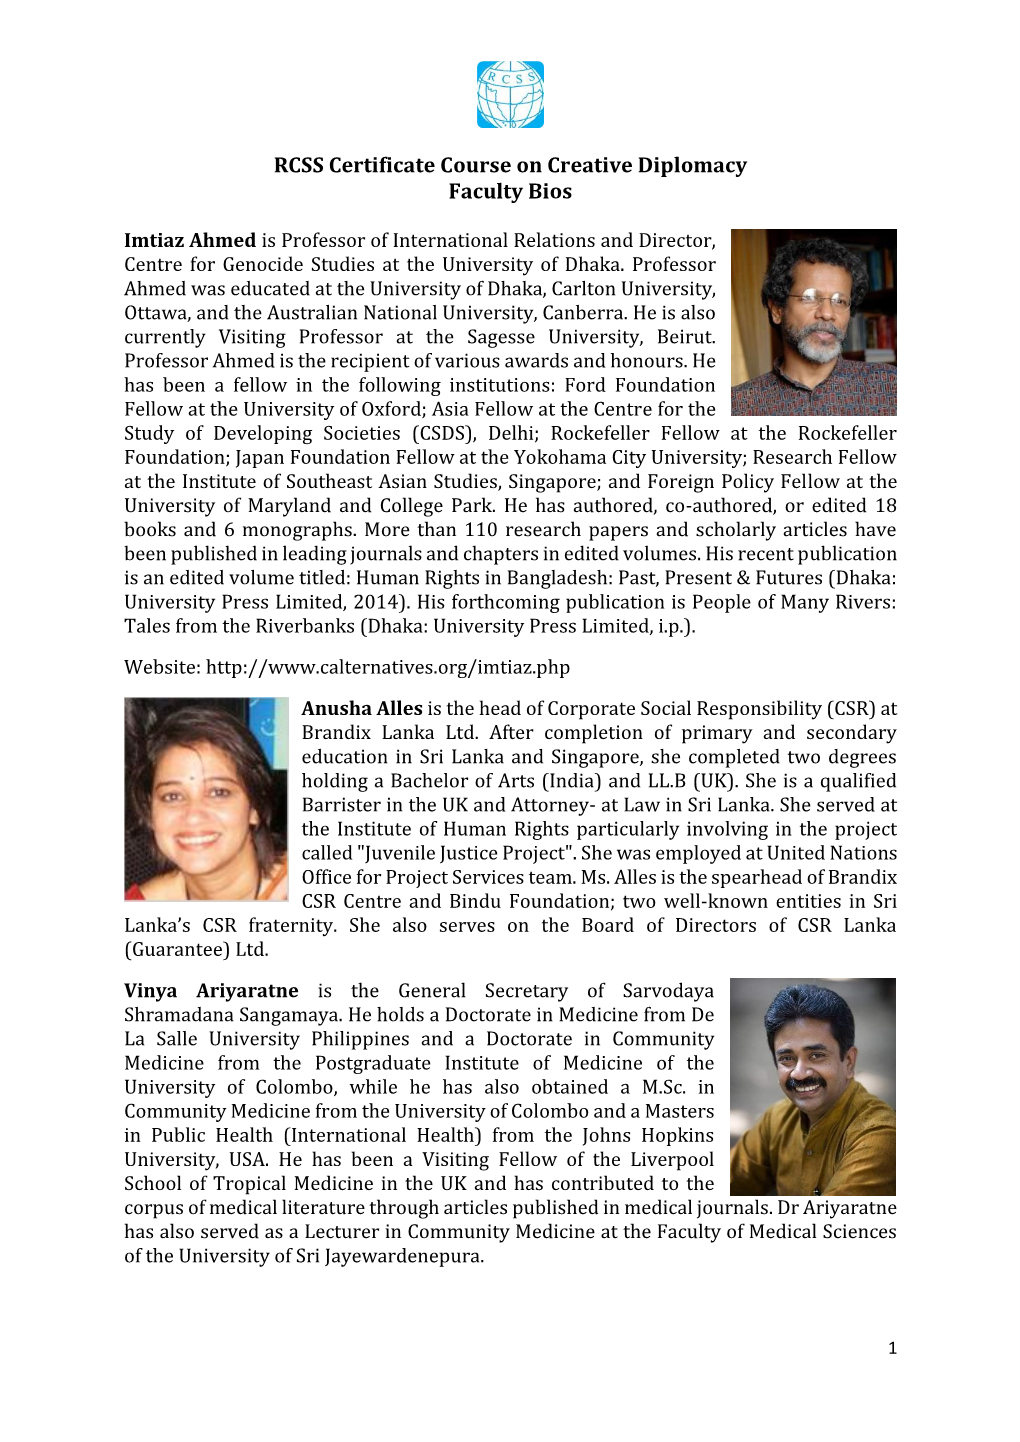 RCSS Certificate Course on Creative Diplomacy Faculty Bios